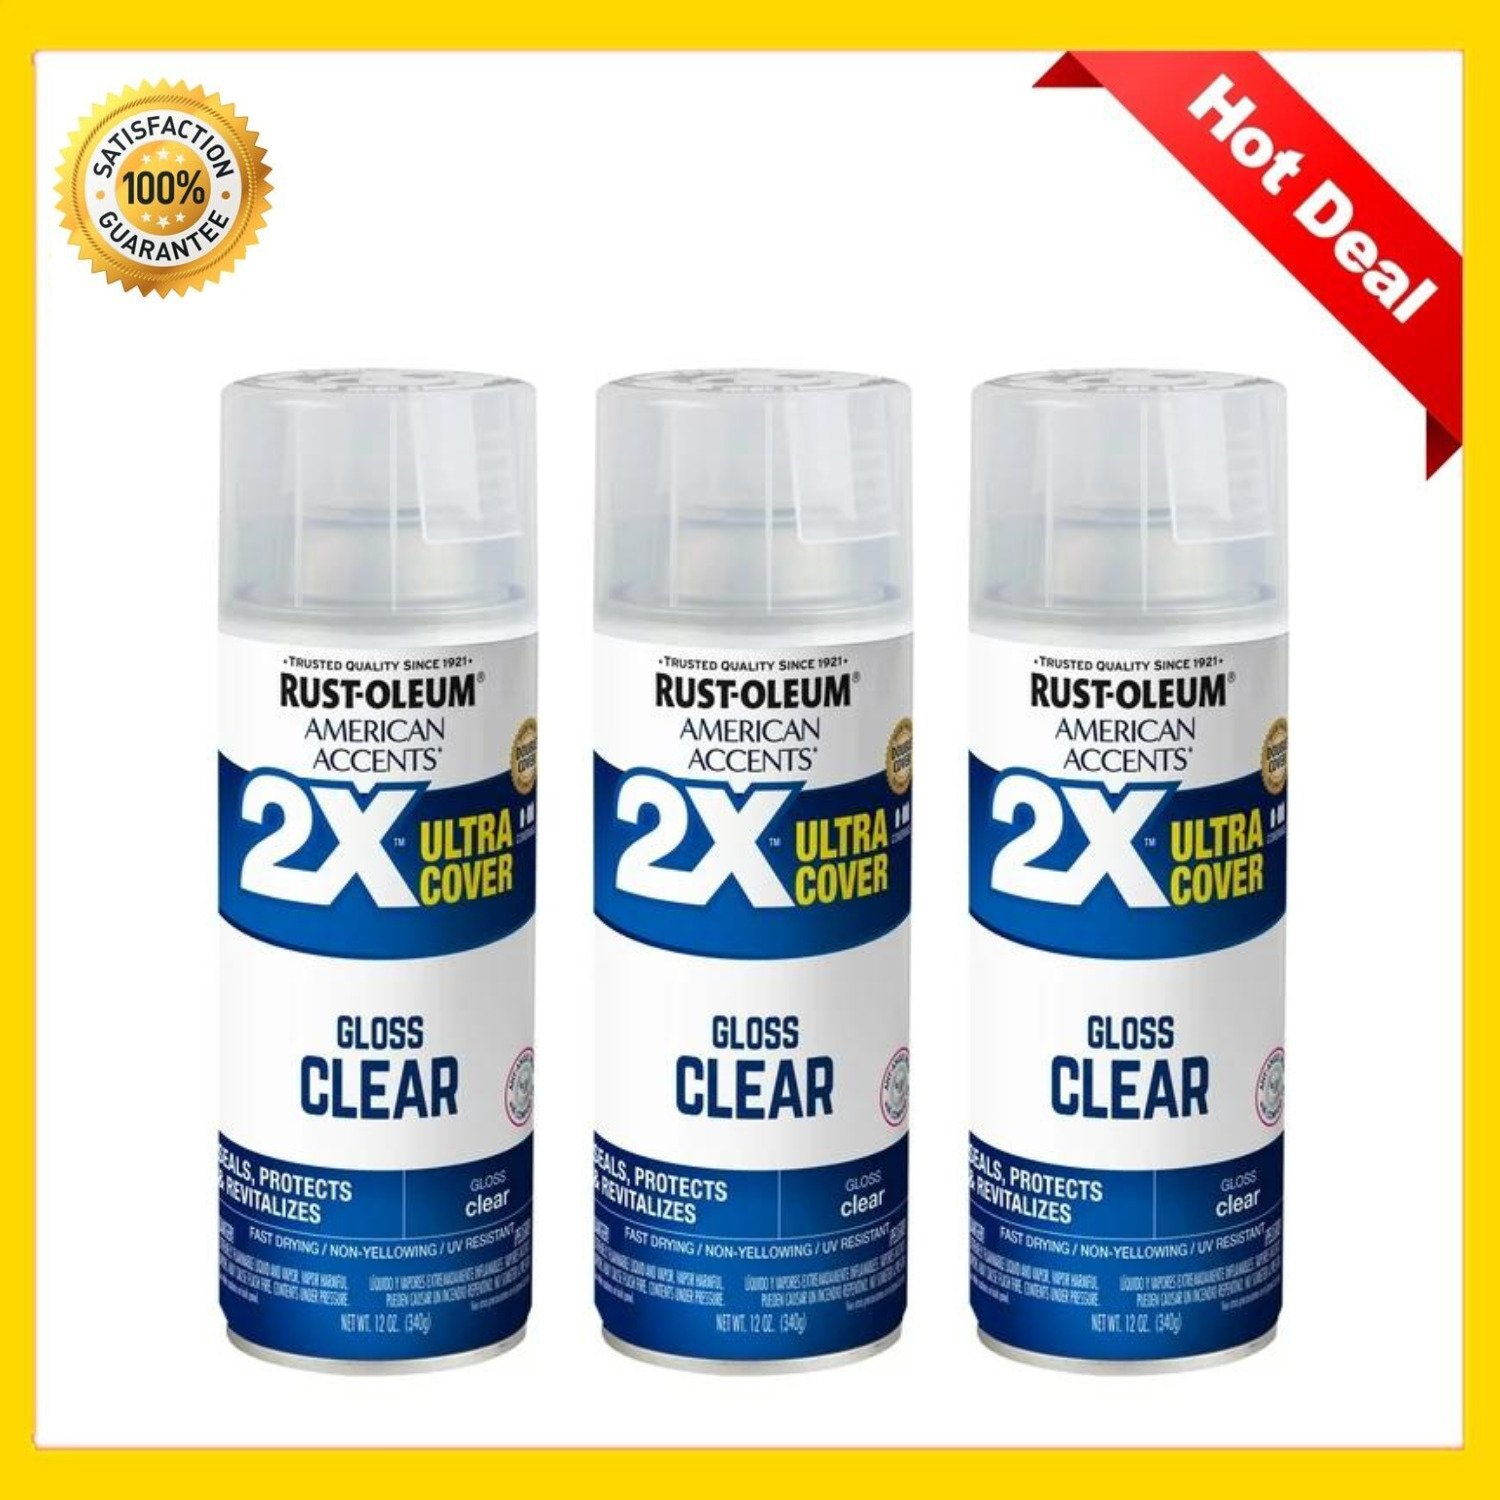 Clear, Rust-Oleum American Accents 2X Ultra Cover Gloss Spray Paint- 12 Oz, 3PK